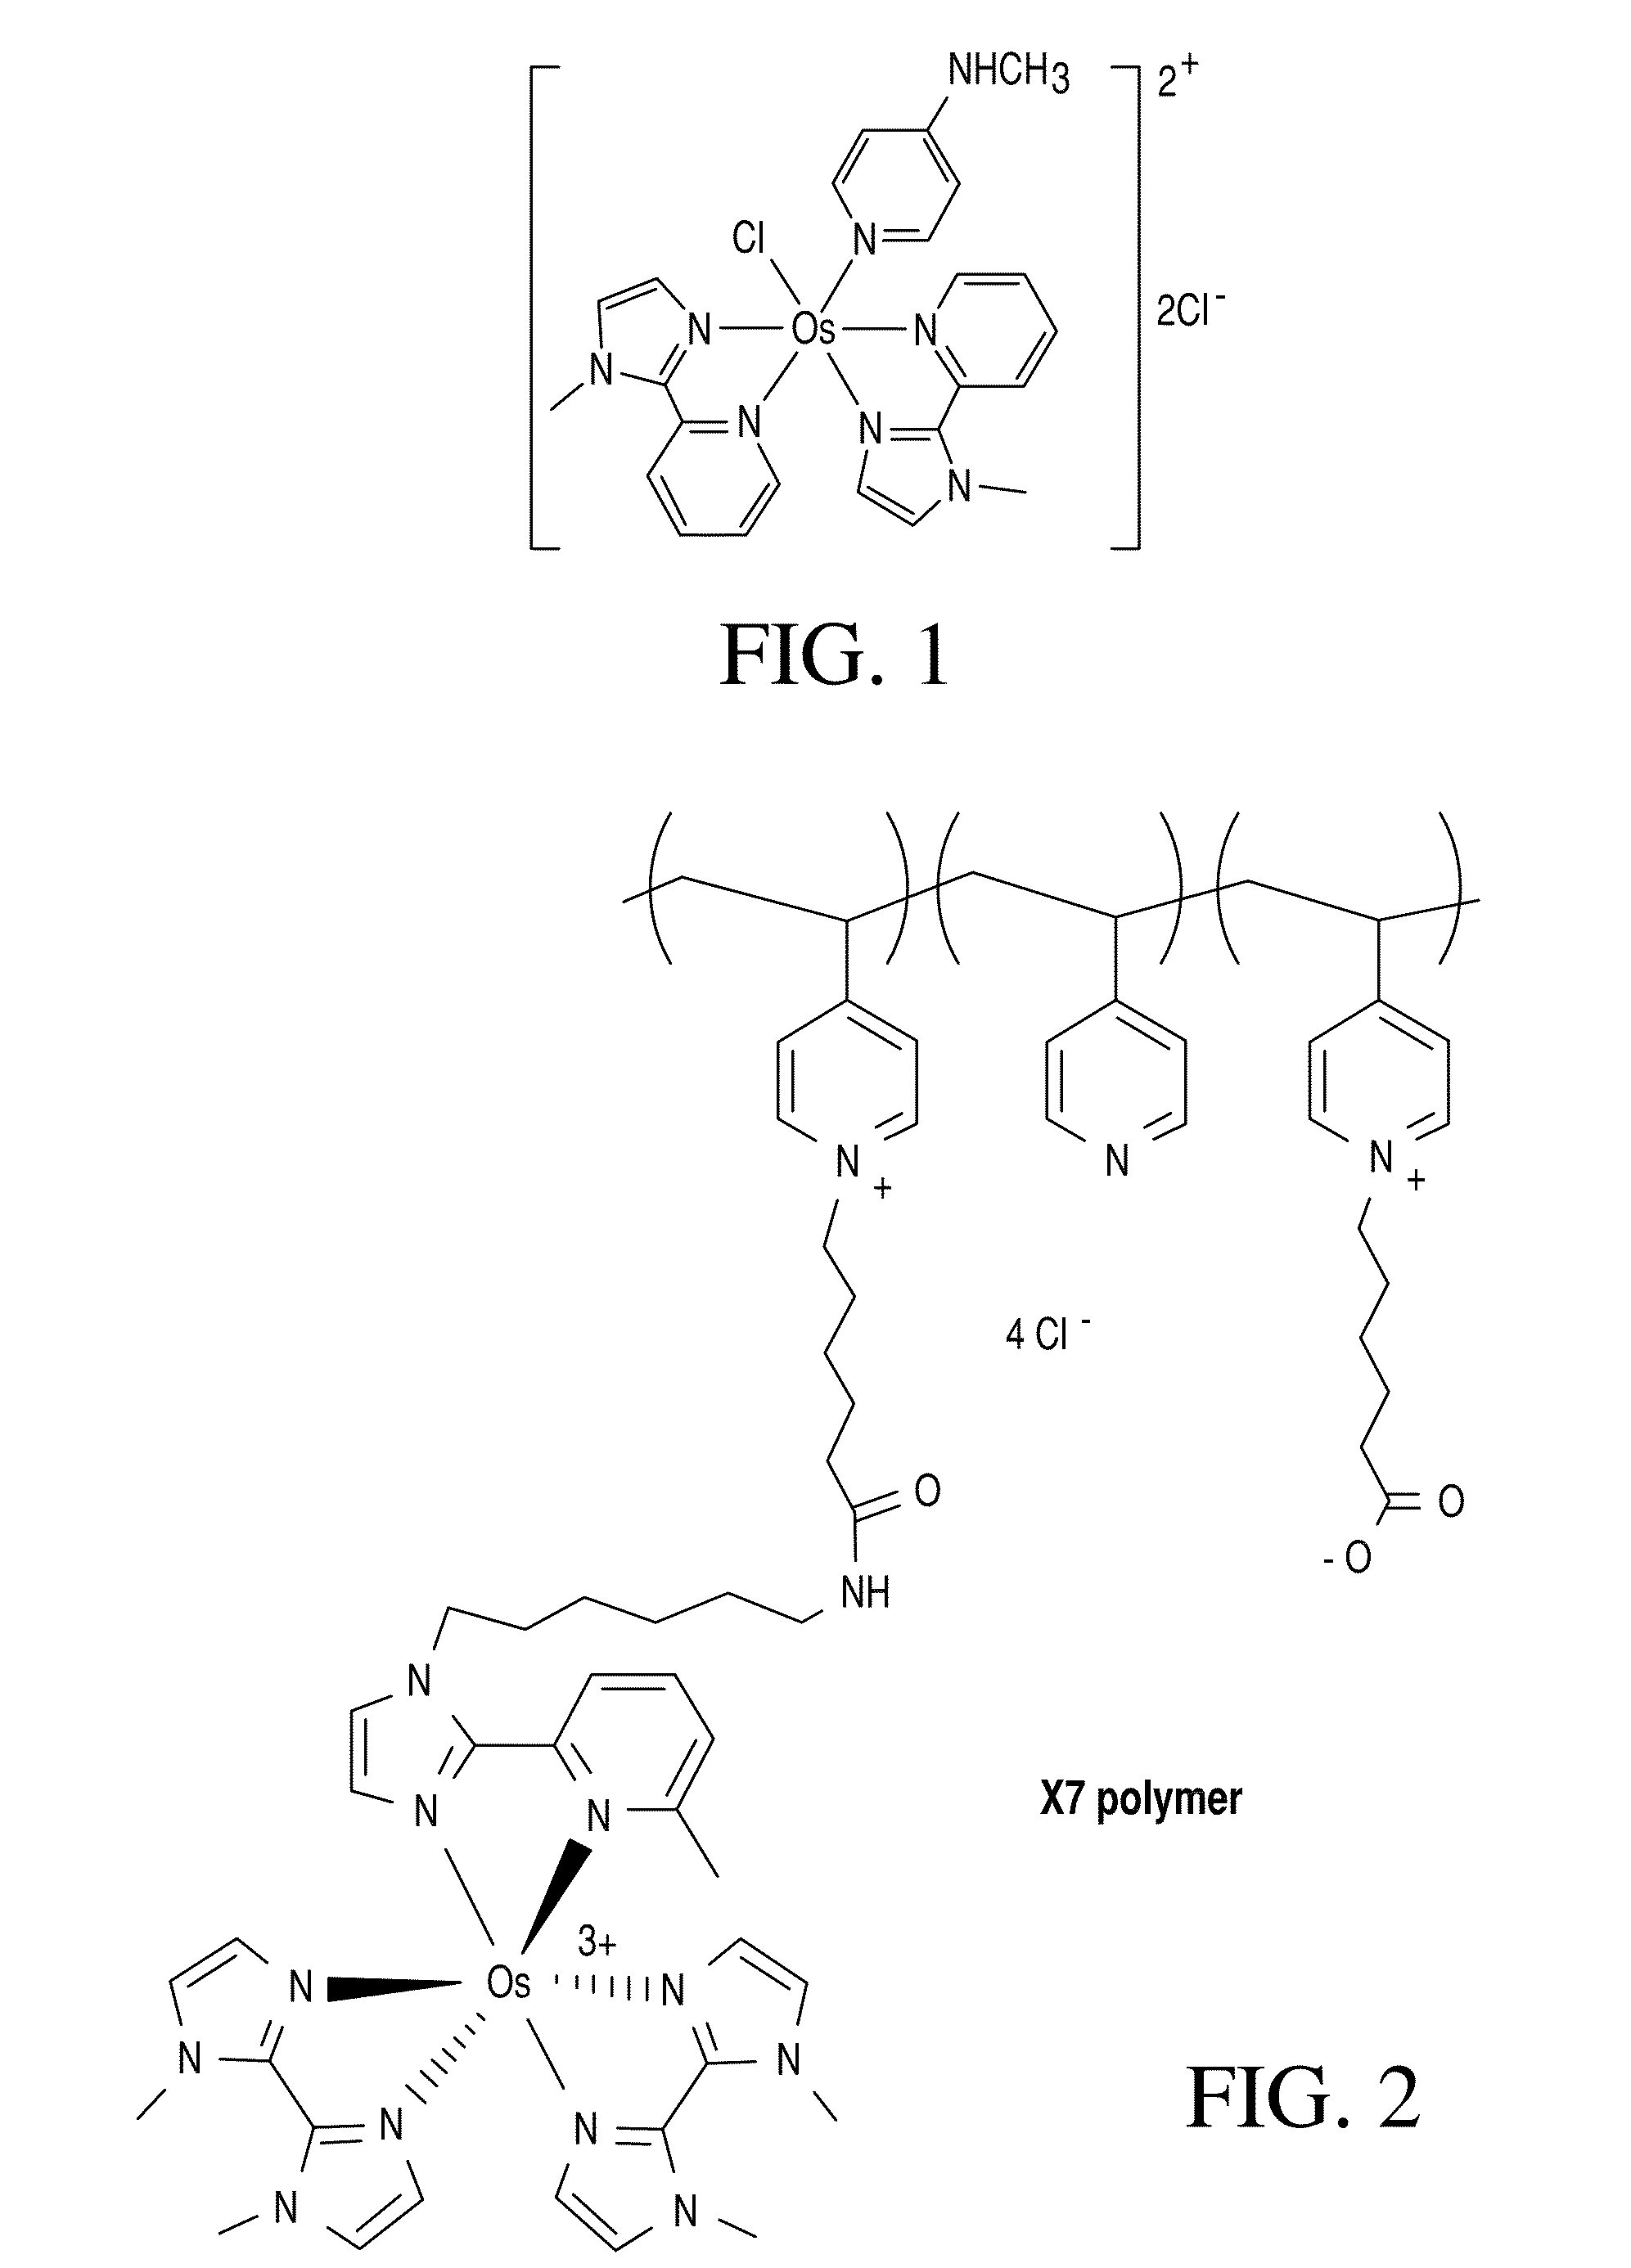 Biosensor with improved interference characteristics